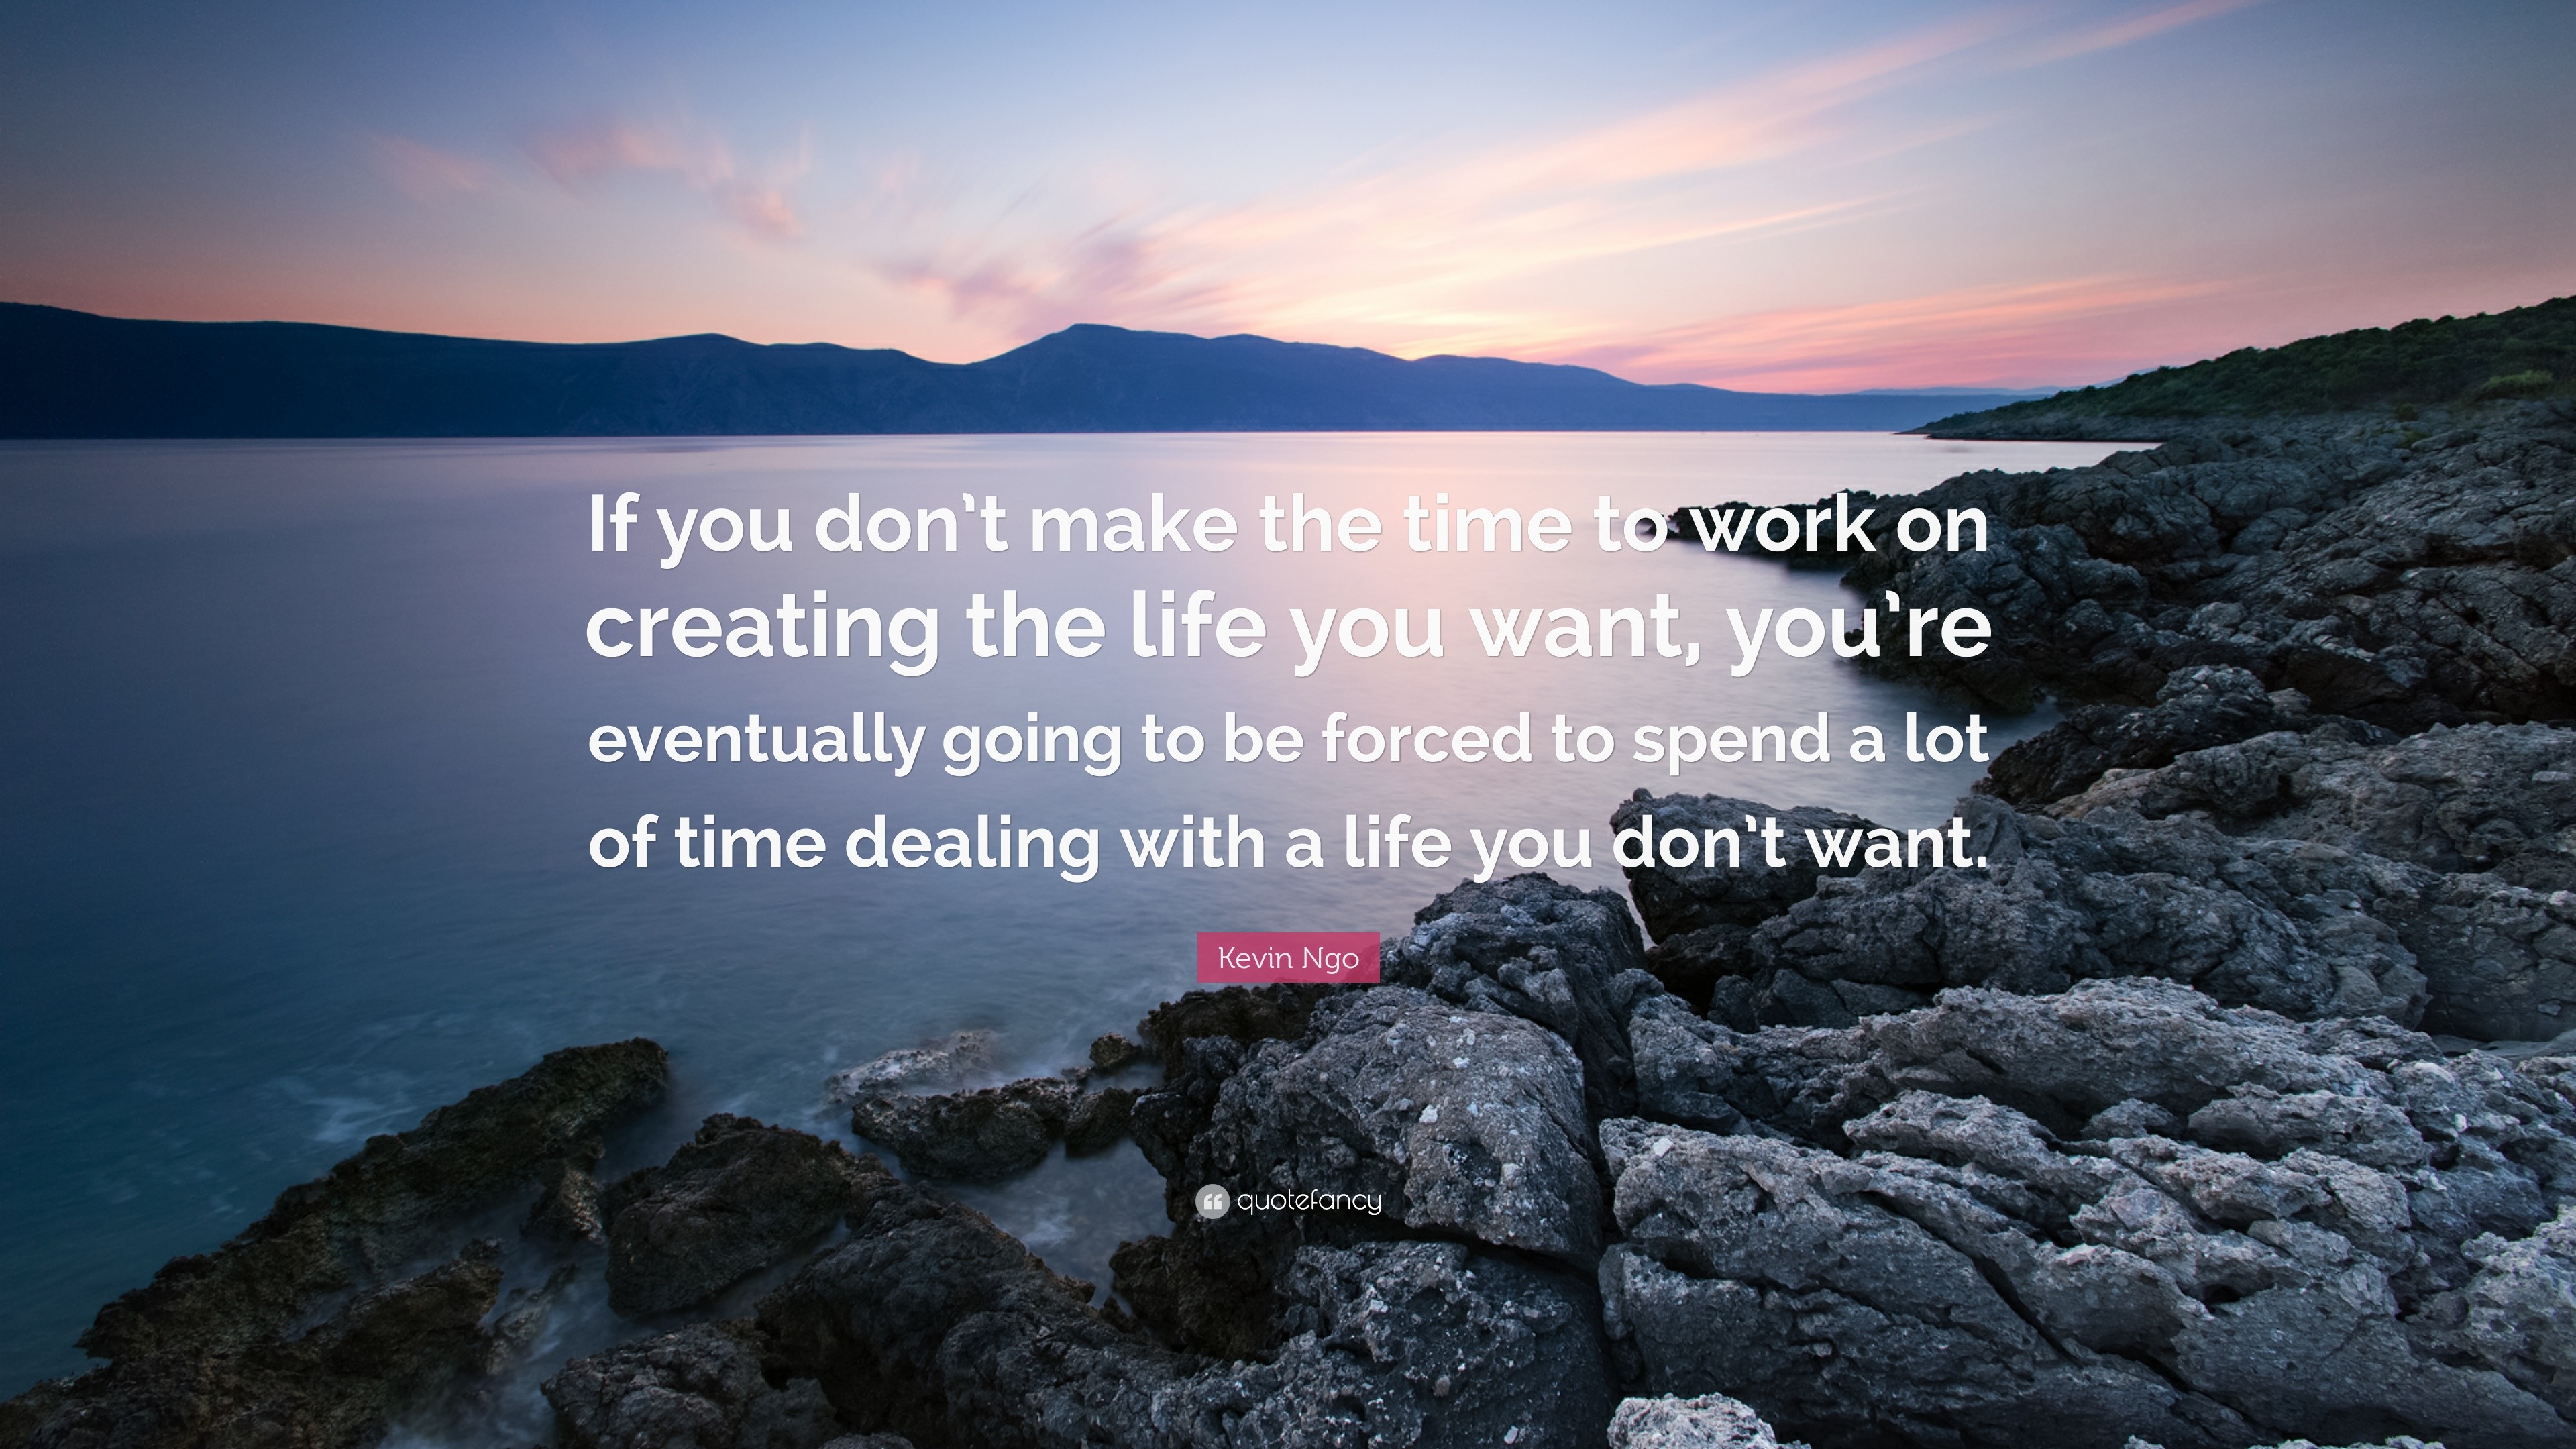 Kevin Ngo Quote: “If you don't make the time to work on creating the life  you want, you're eventually going to be forced to spend a lot of”